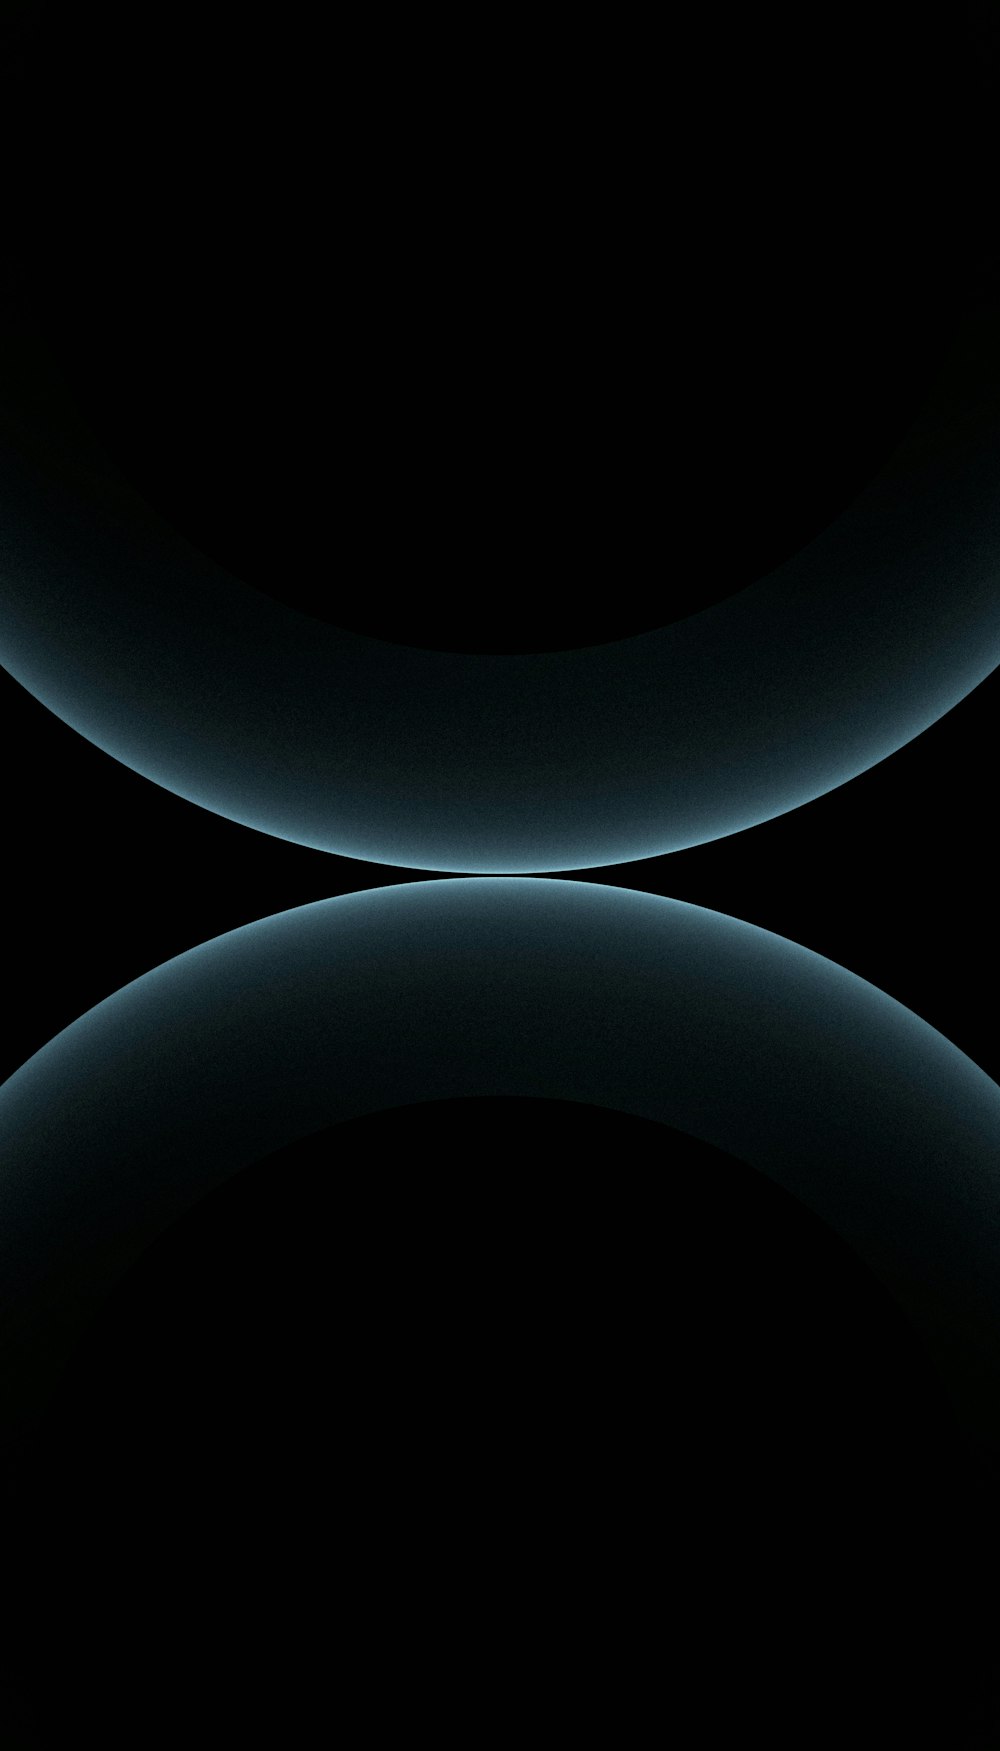 a black background with two circles in the middle